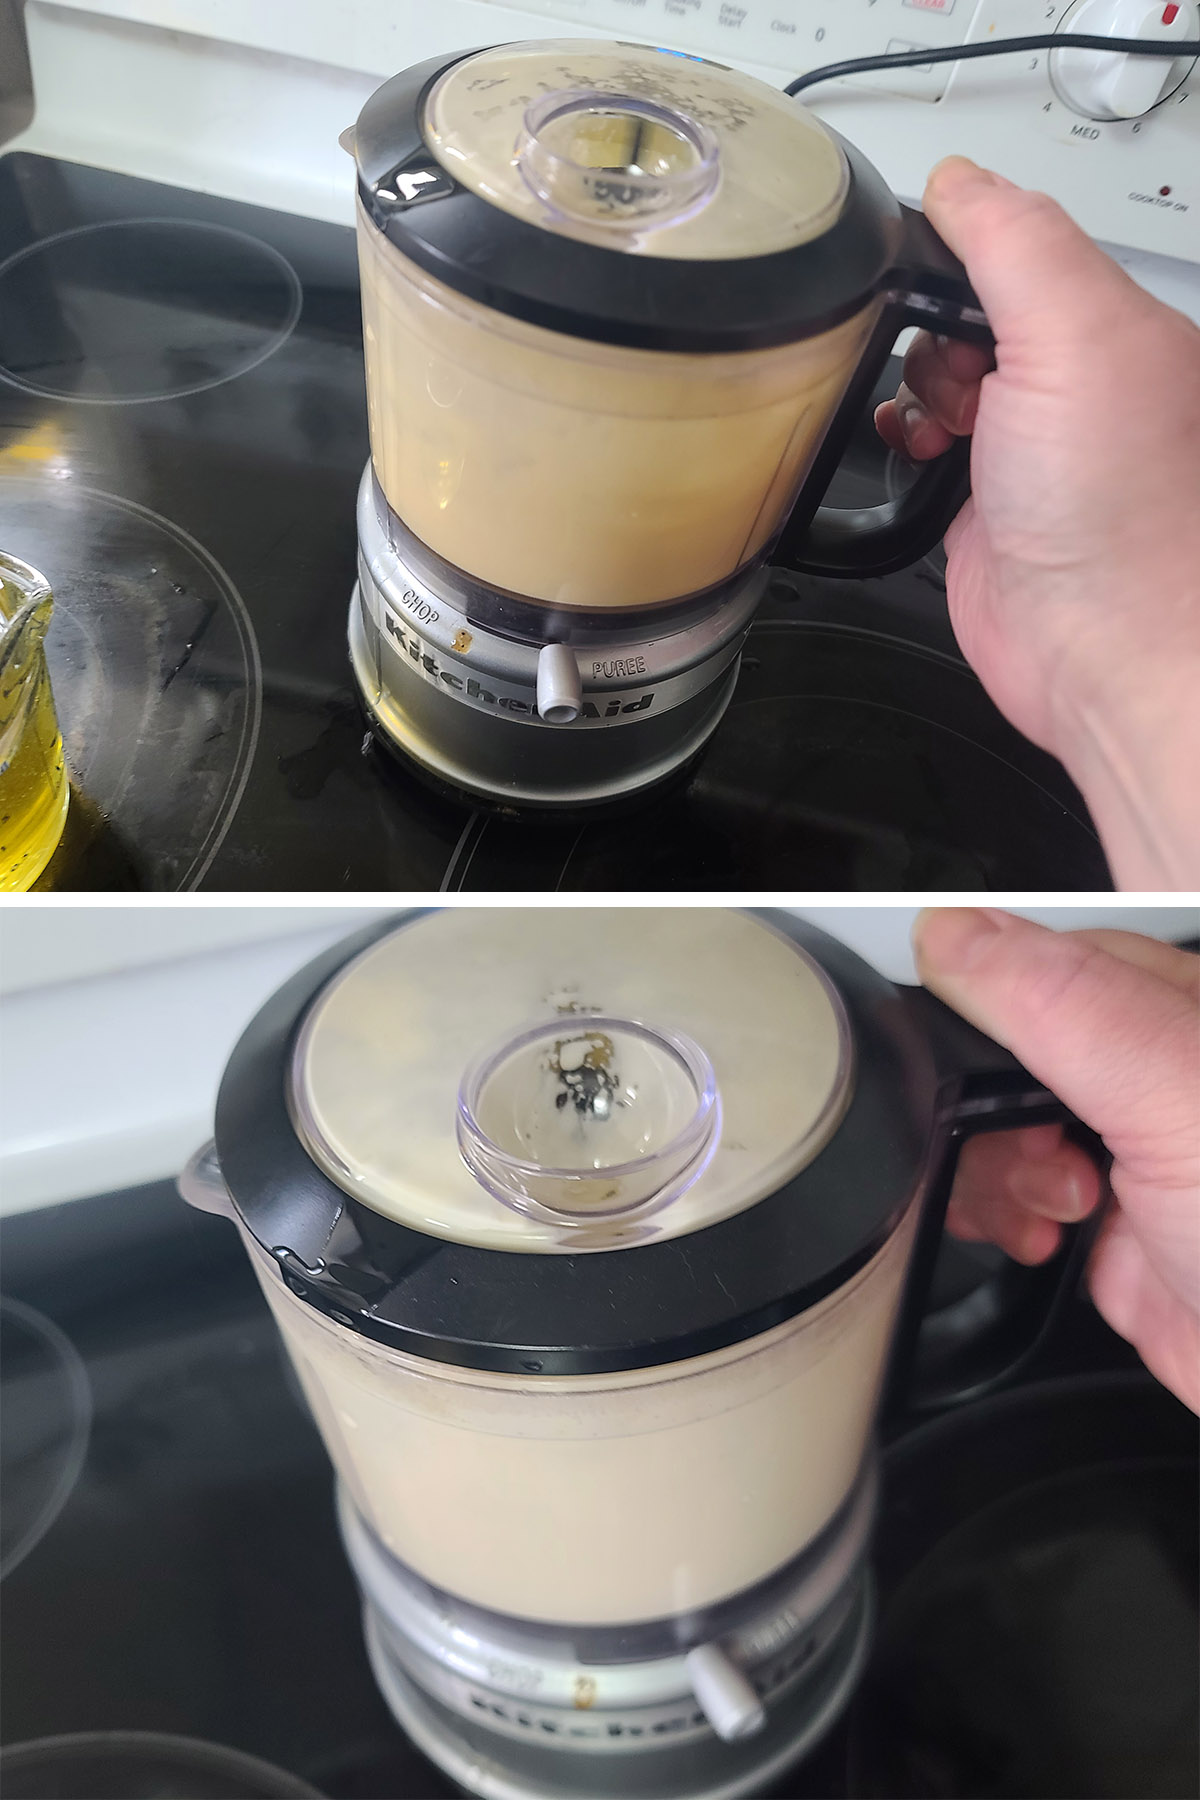 A two part image showing keto mayo being made in a mini food processor.